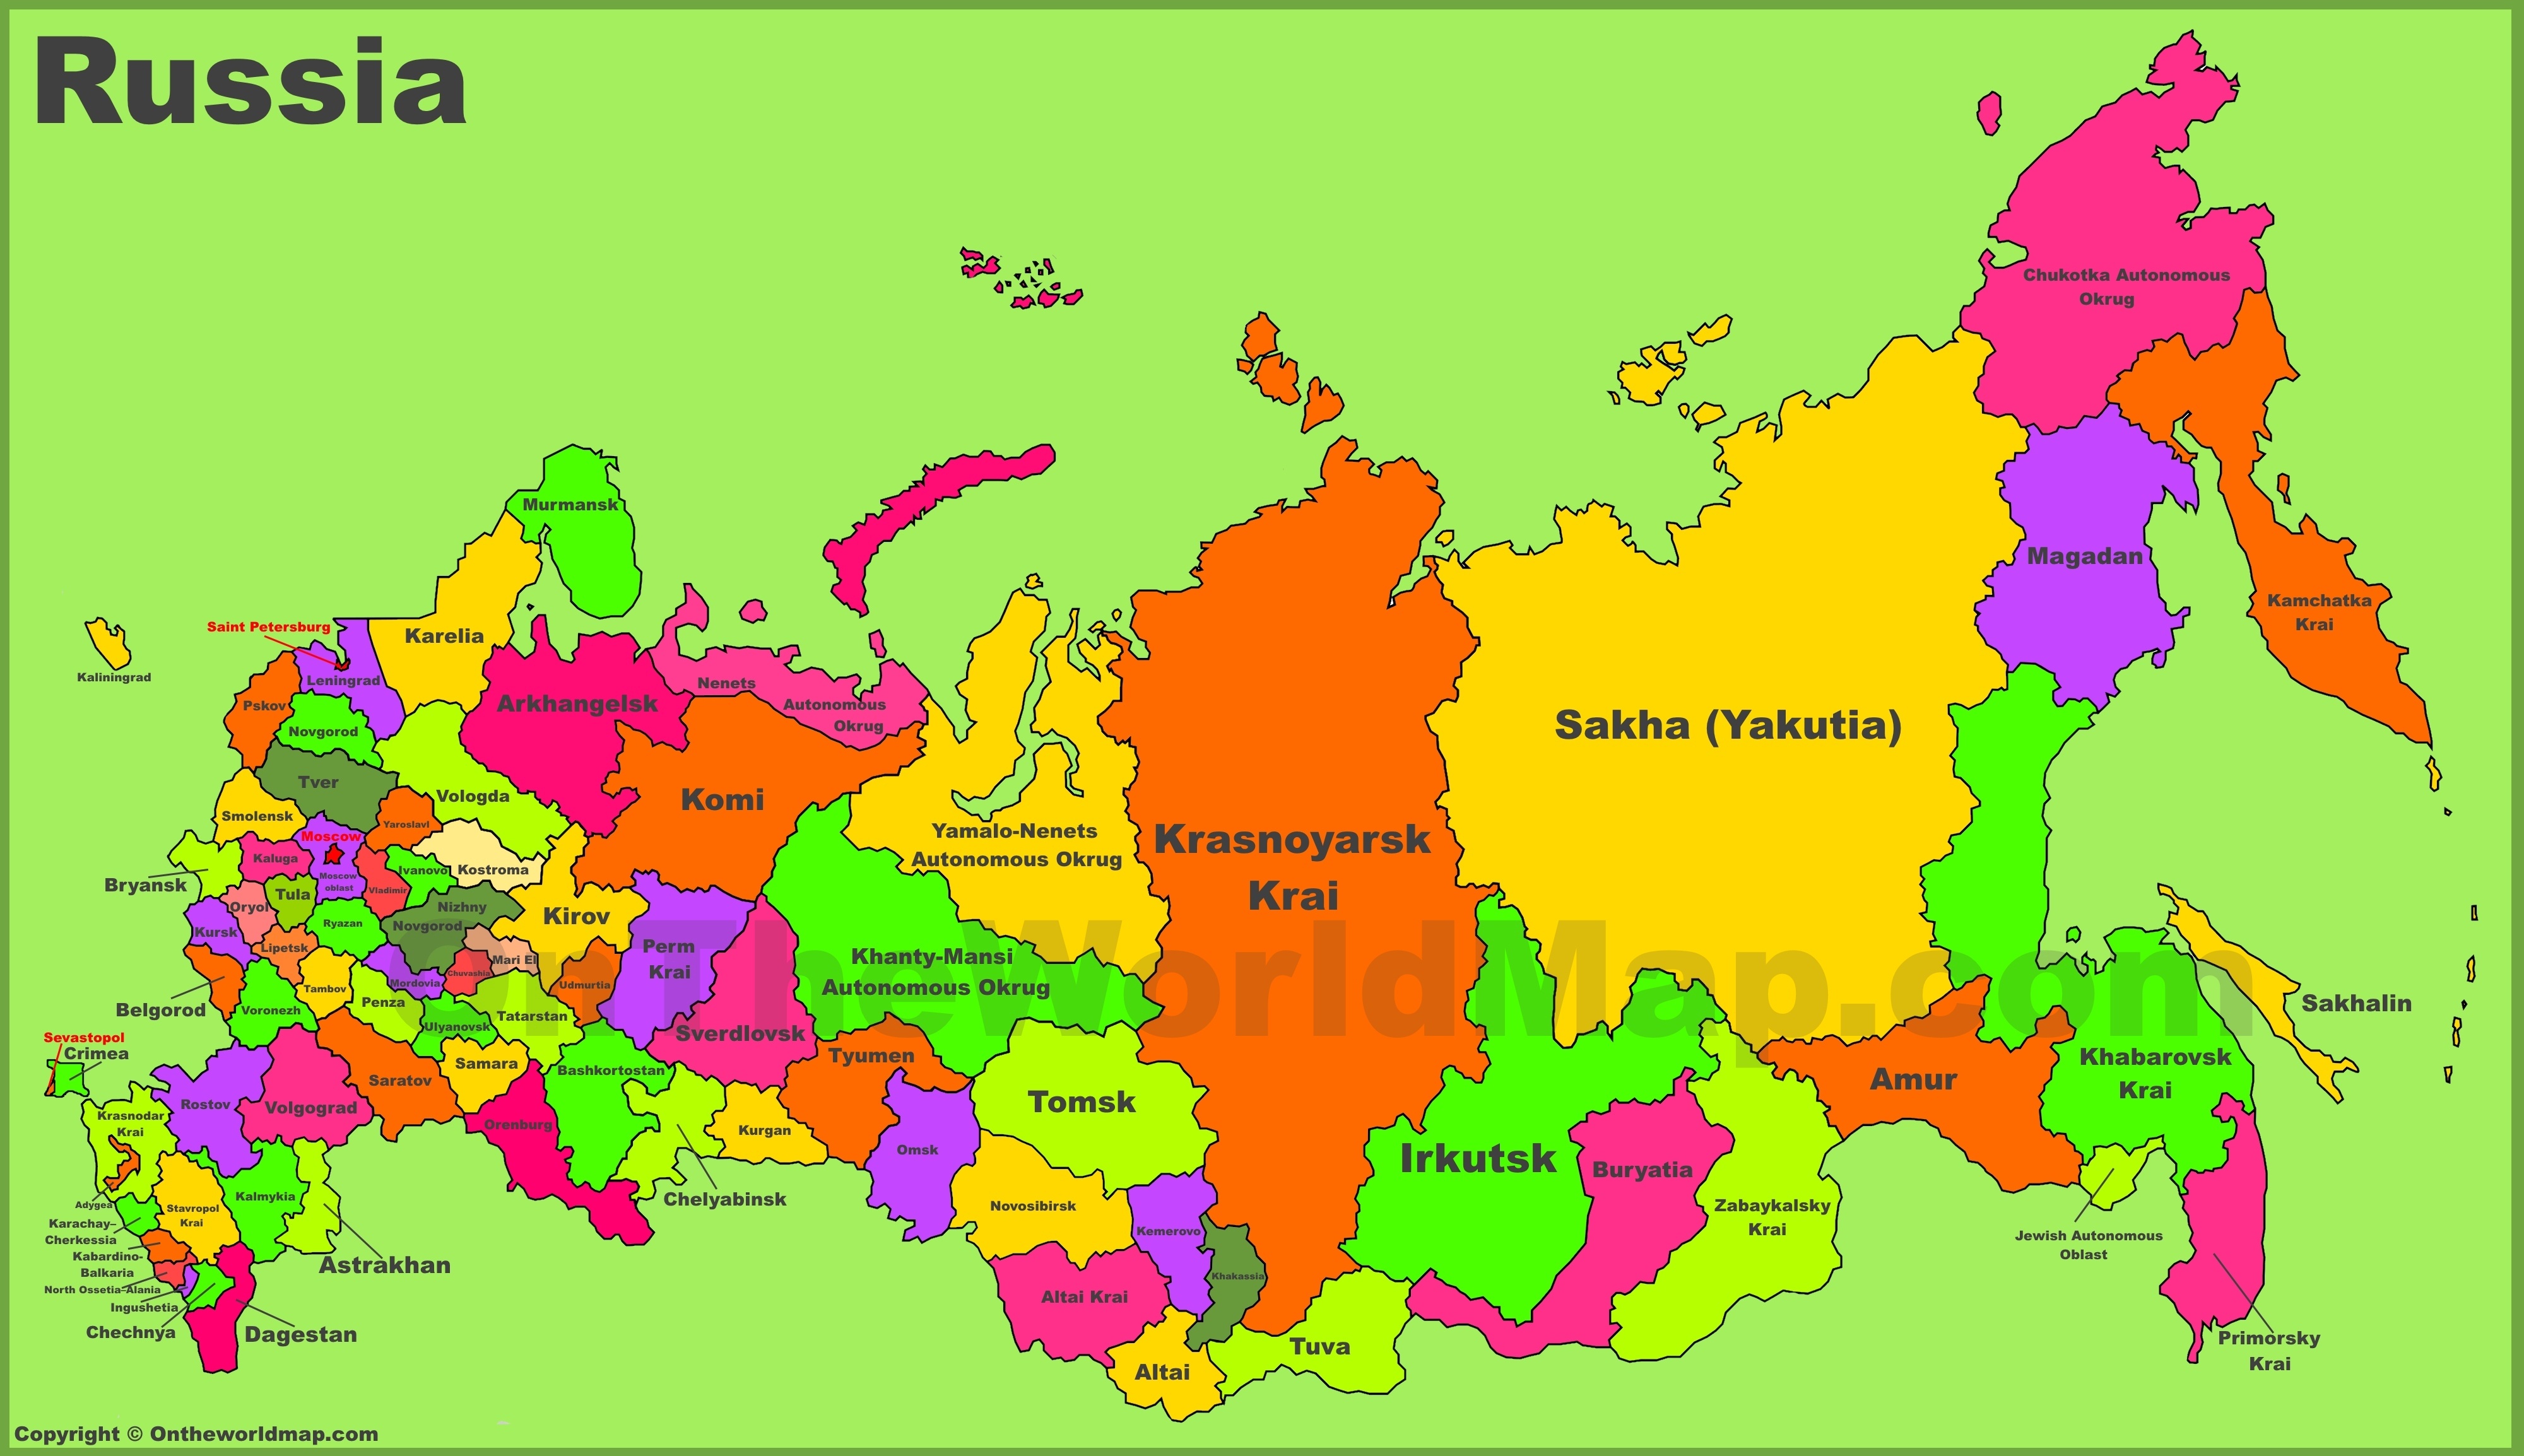 Russia Maps | Maps Of Russia (Russian Federation) - Free Printable Map Of Russia